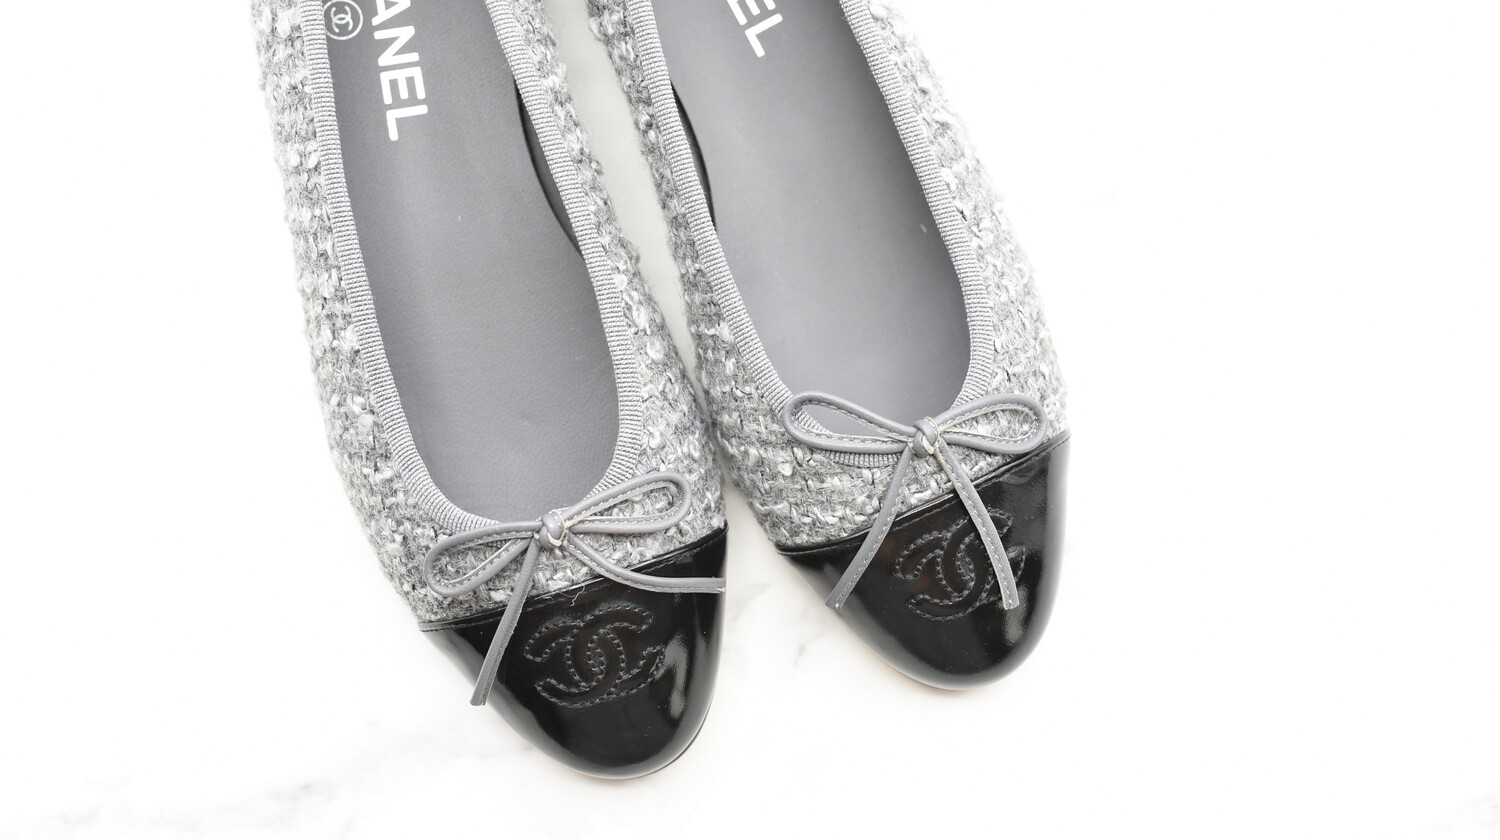 Chanel Ballet Flats, Black and White Tweed, Size 38.5, New in Box WA001